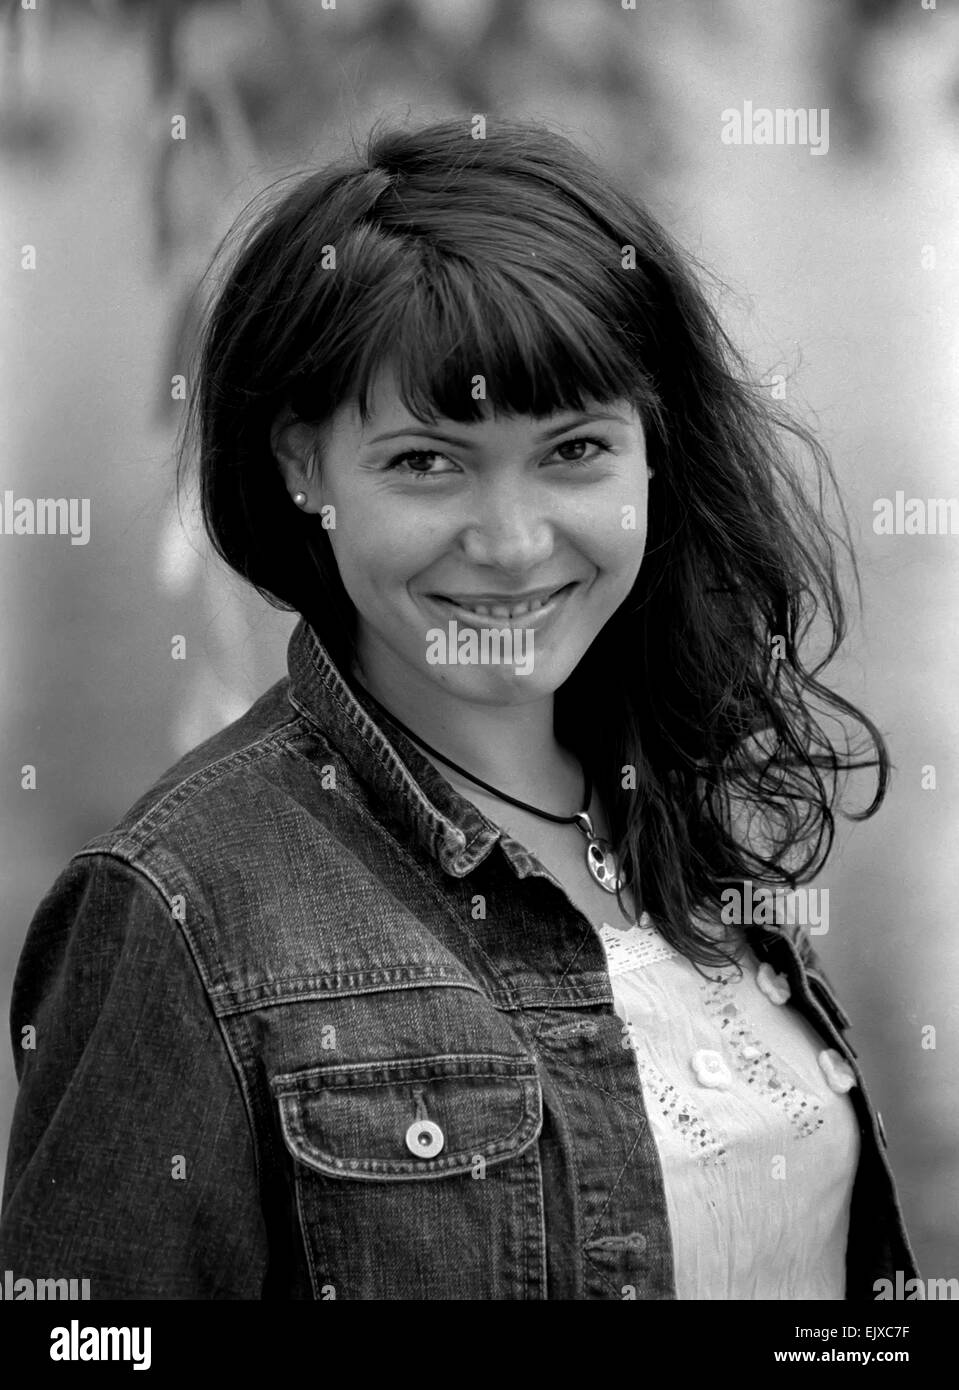 Black and white portrait of a smiling young woman in denim jacket and with round pendant. Stock Photo